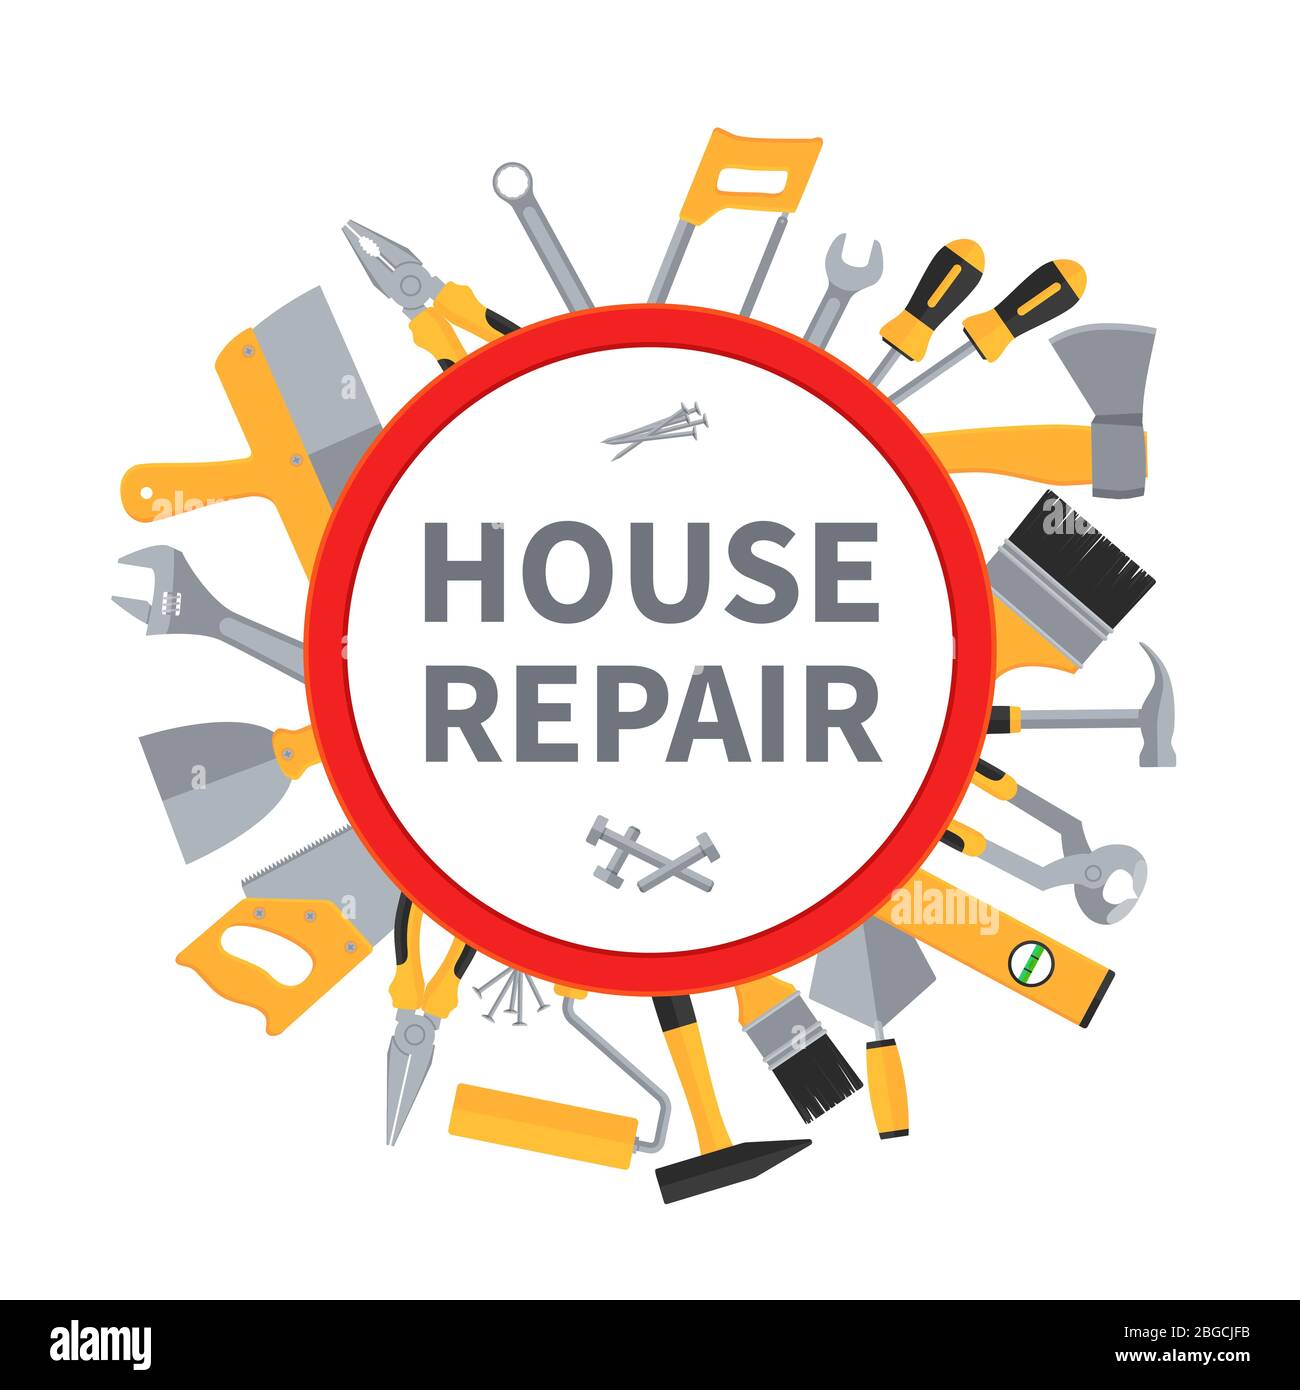 House repair and remodeling vector background with construction tools. Trowel and ruler, renovation and repair illustration Stock Vector